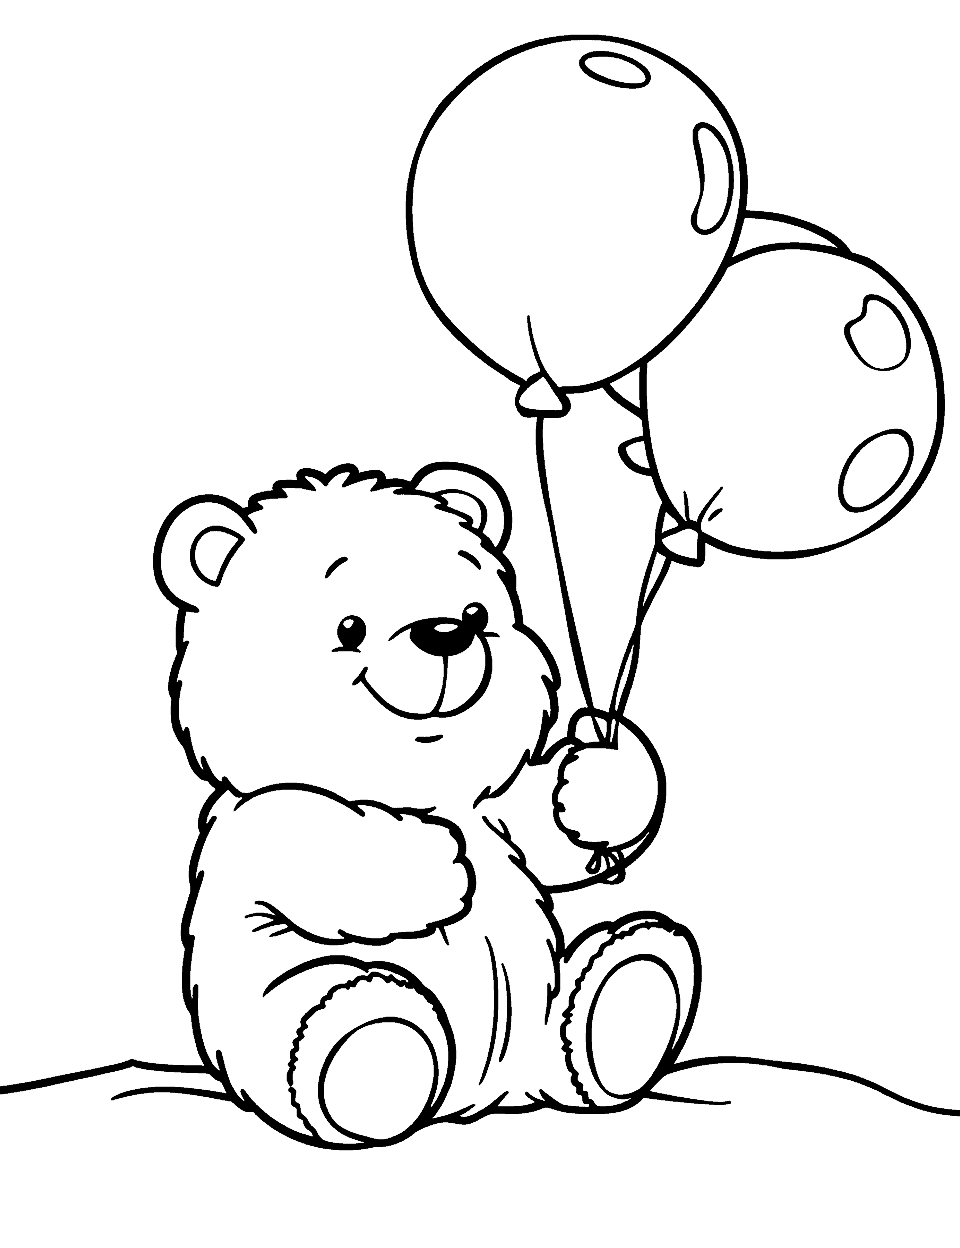 Cute Teddy Bear With Balloons Coloring Page - A teddy bear holding a bunch of colorful balloons.